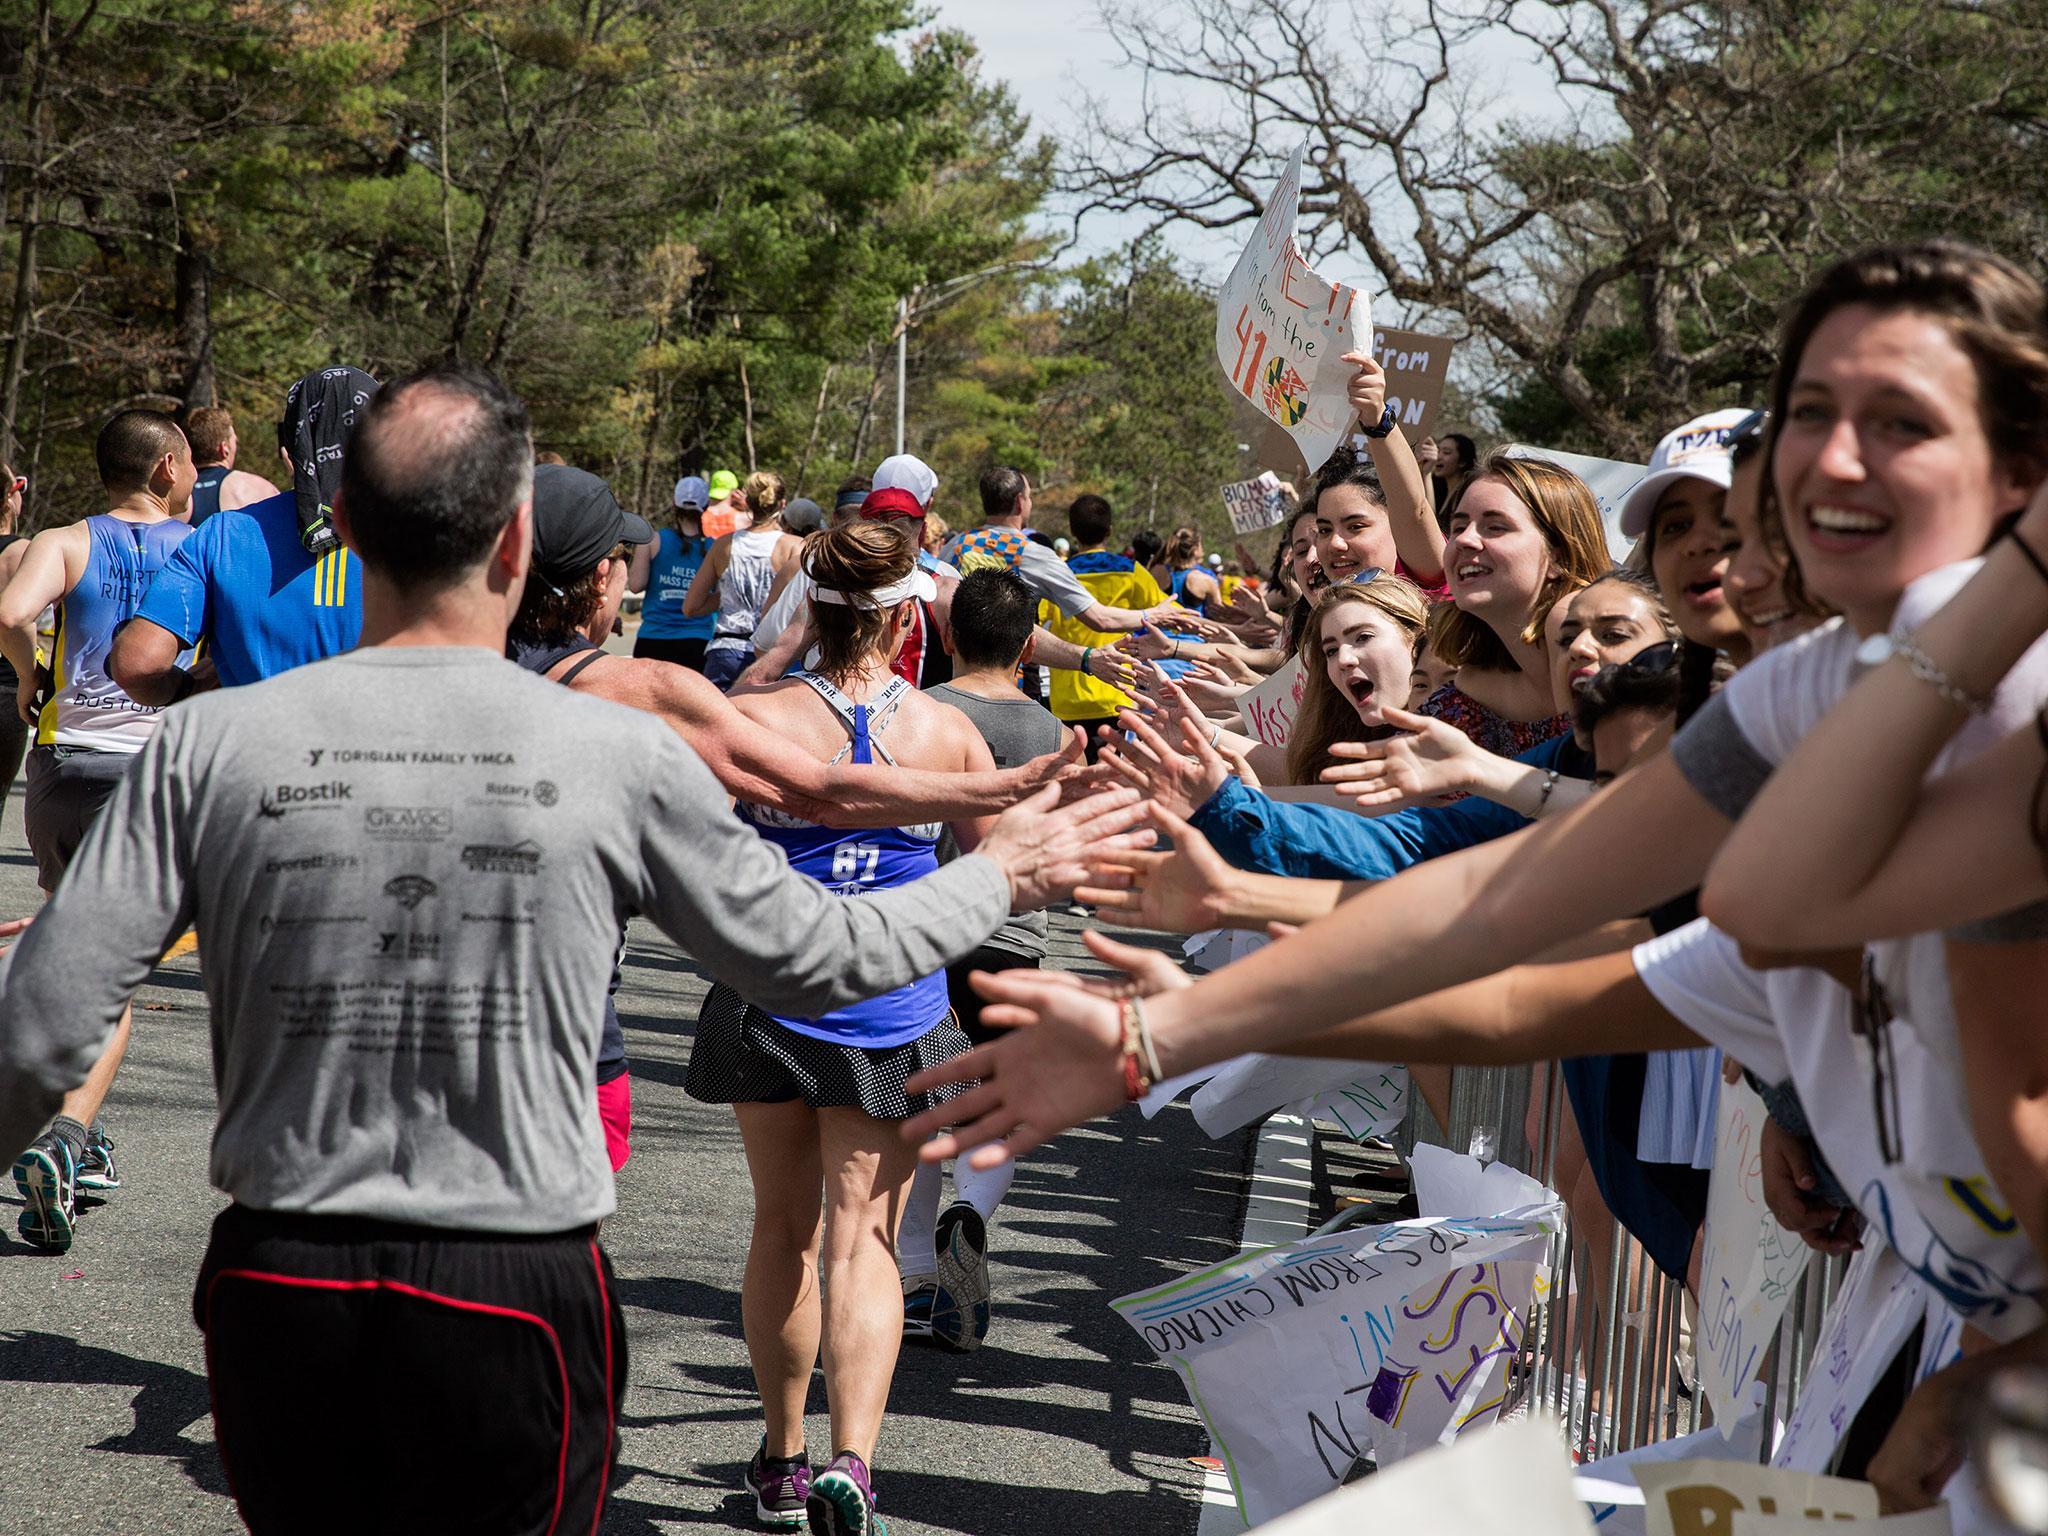 Crowds cheer on Boston Marathon runners in the iconic 'scream tunnel' near Wellesley College on April 17, 2017, in Wellesley Massachusetts